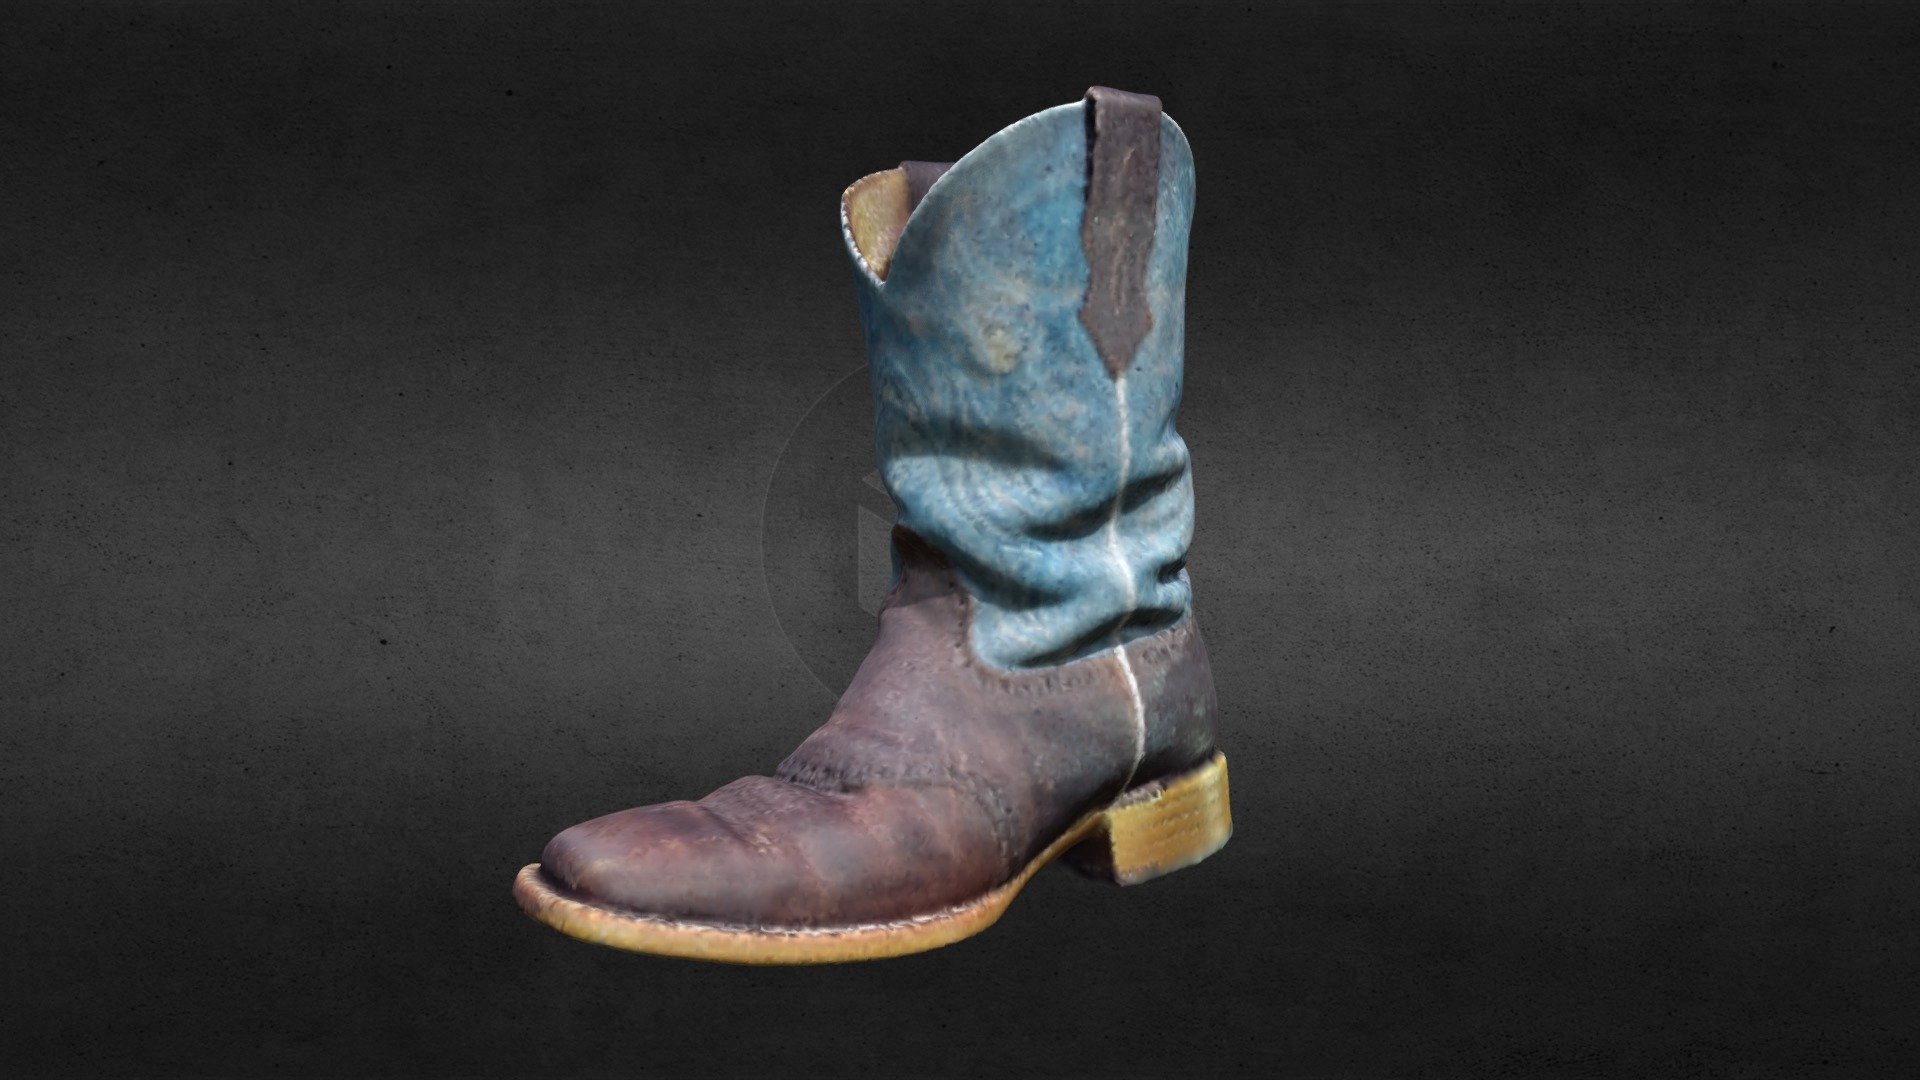 My favorite boots! To be more specific: Cody James brand, Style #BCJSP22P4, Size 10-D

This is not a paid endorsement, just an honest lay appreciation.

You'll have to wait for the other shoe to drop.... 3d model